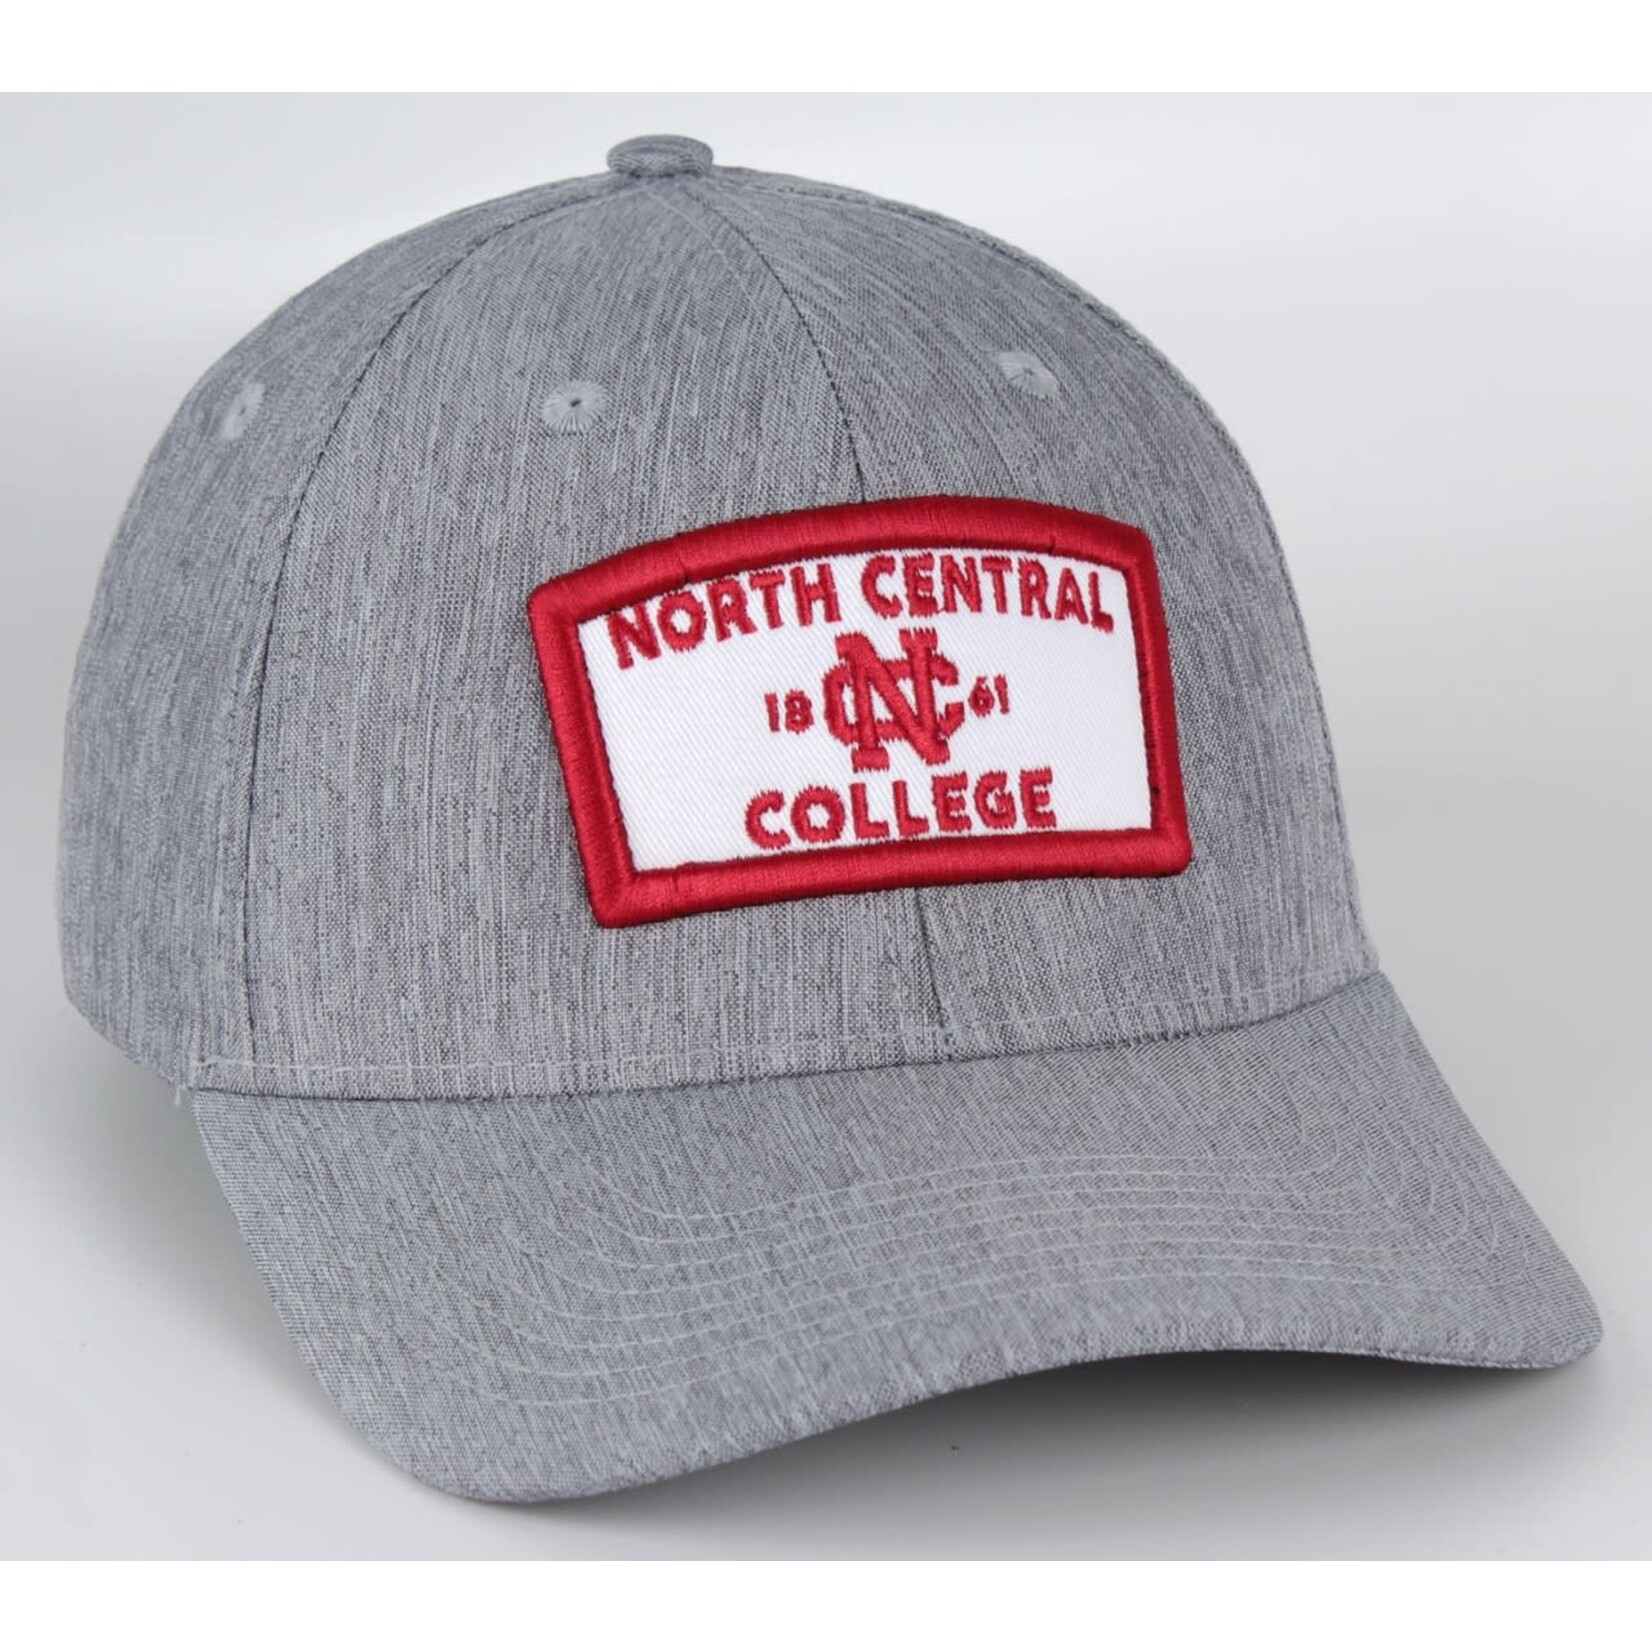 Ahead North Central College Structured hat by Ahead